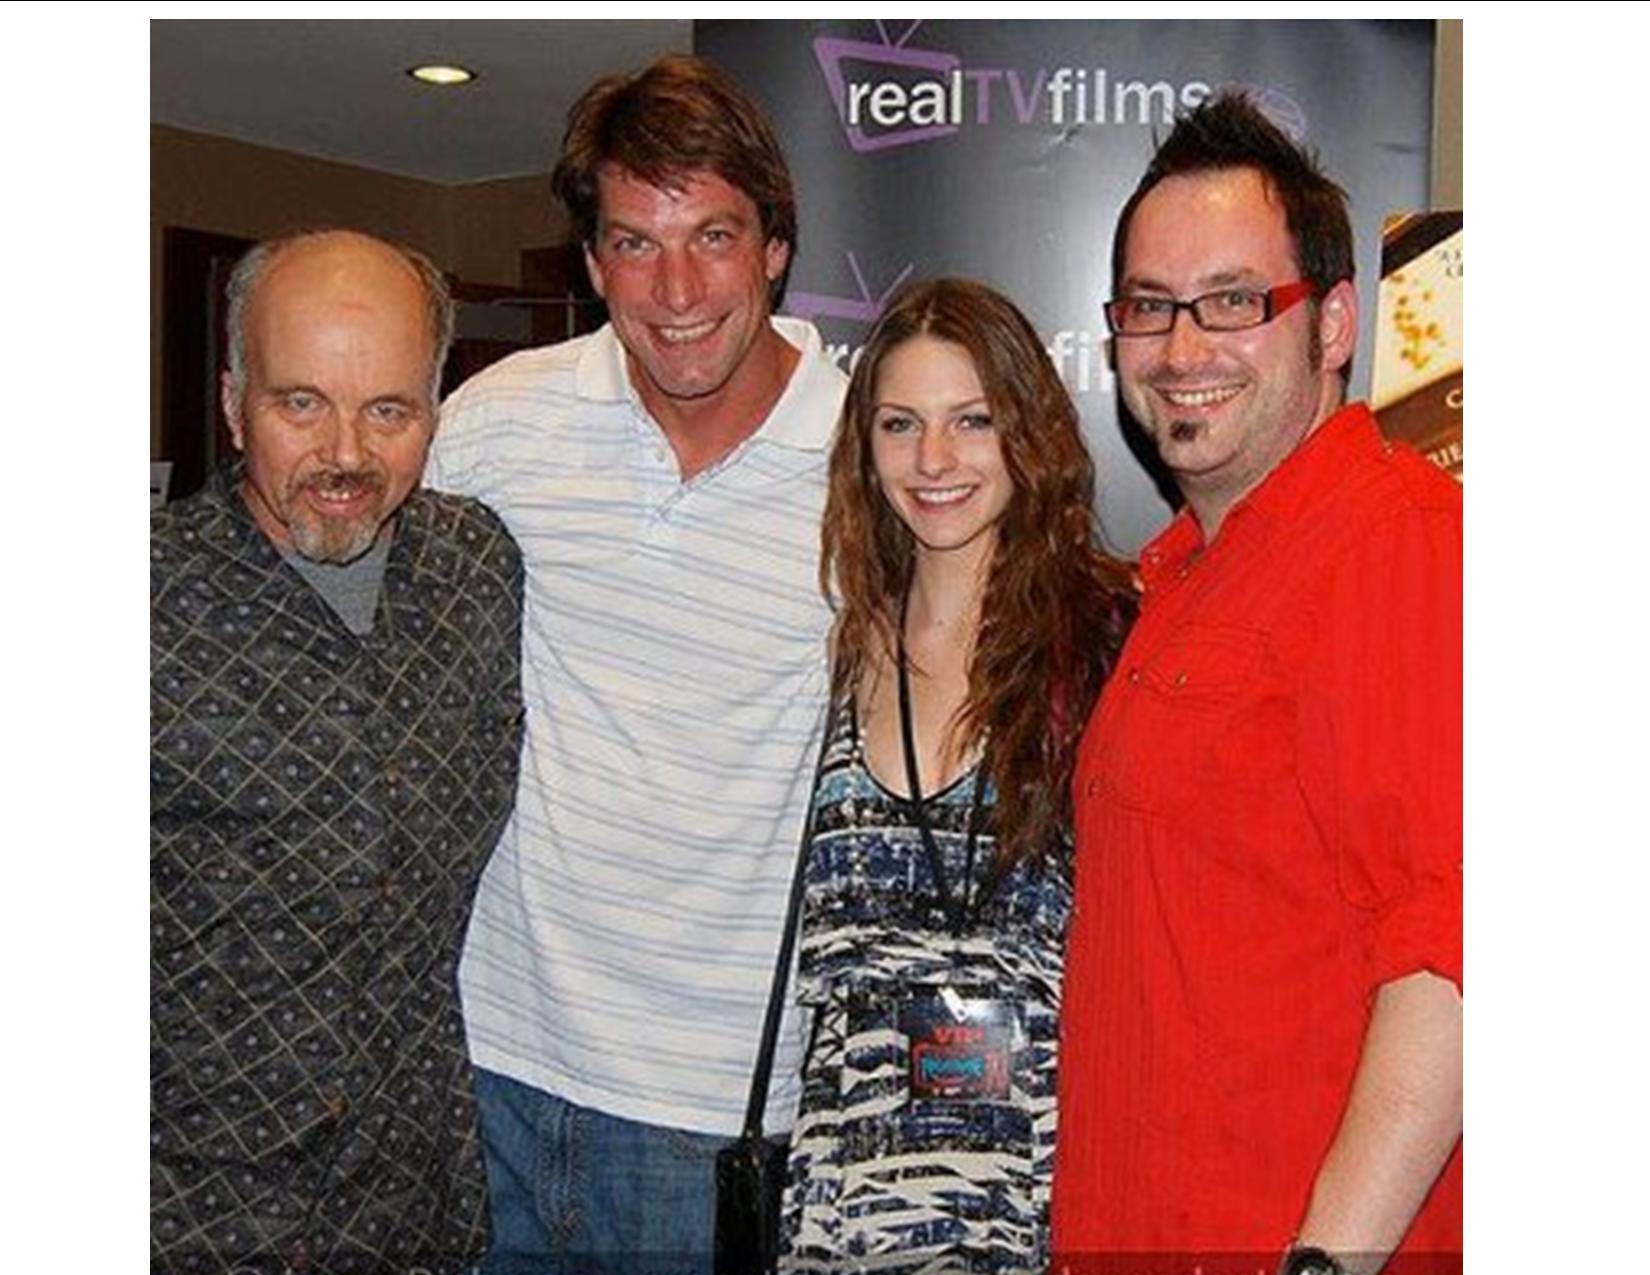 Clint Howard, Charlie O'Connell, Jenna Stone and Paul Morrell at Texas Frightmare Film Festival